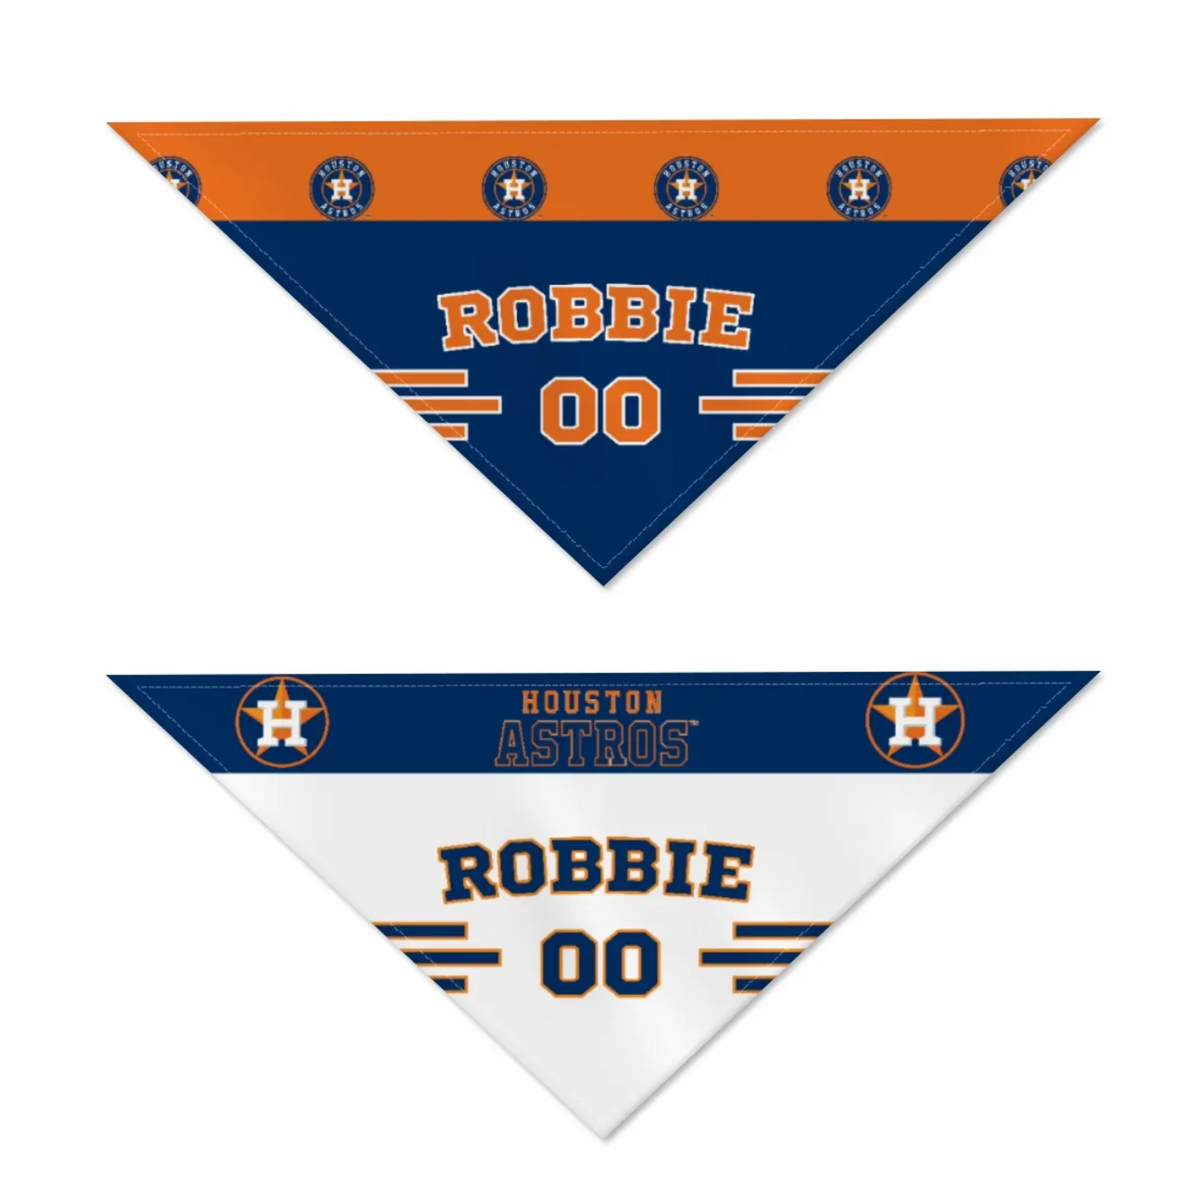 Houston Astros Home/Road Personalized Reversible Bandana - 3 Red Rovers